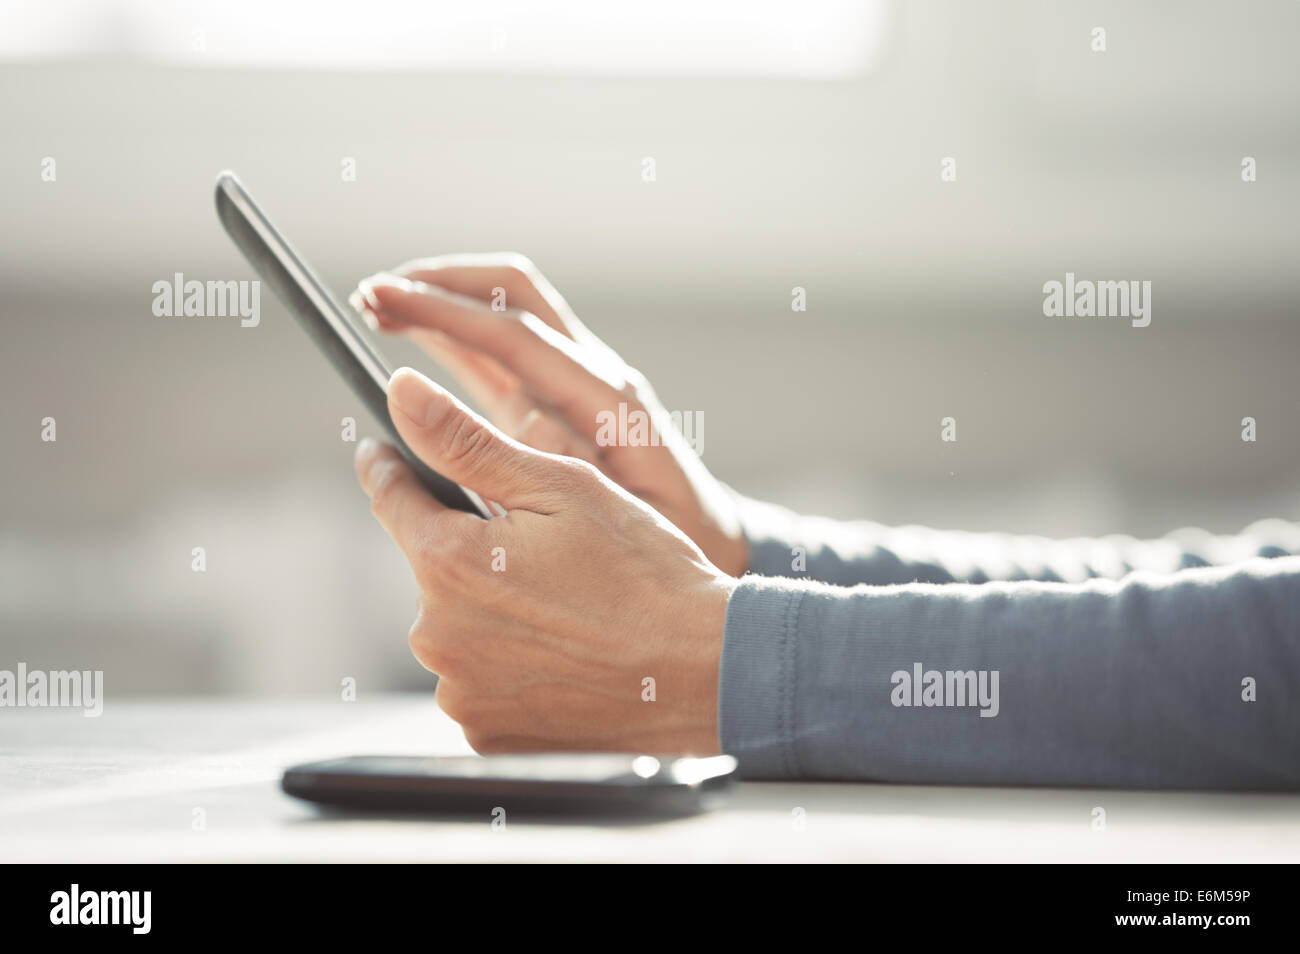 Hands of woman working with digital tablet Stock Photo